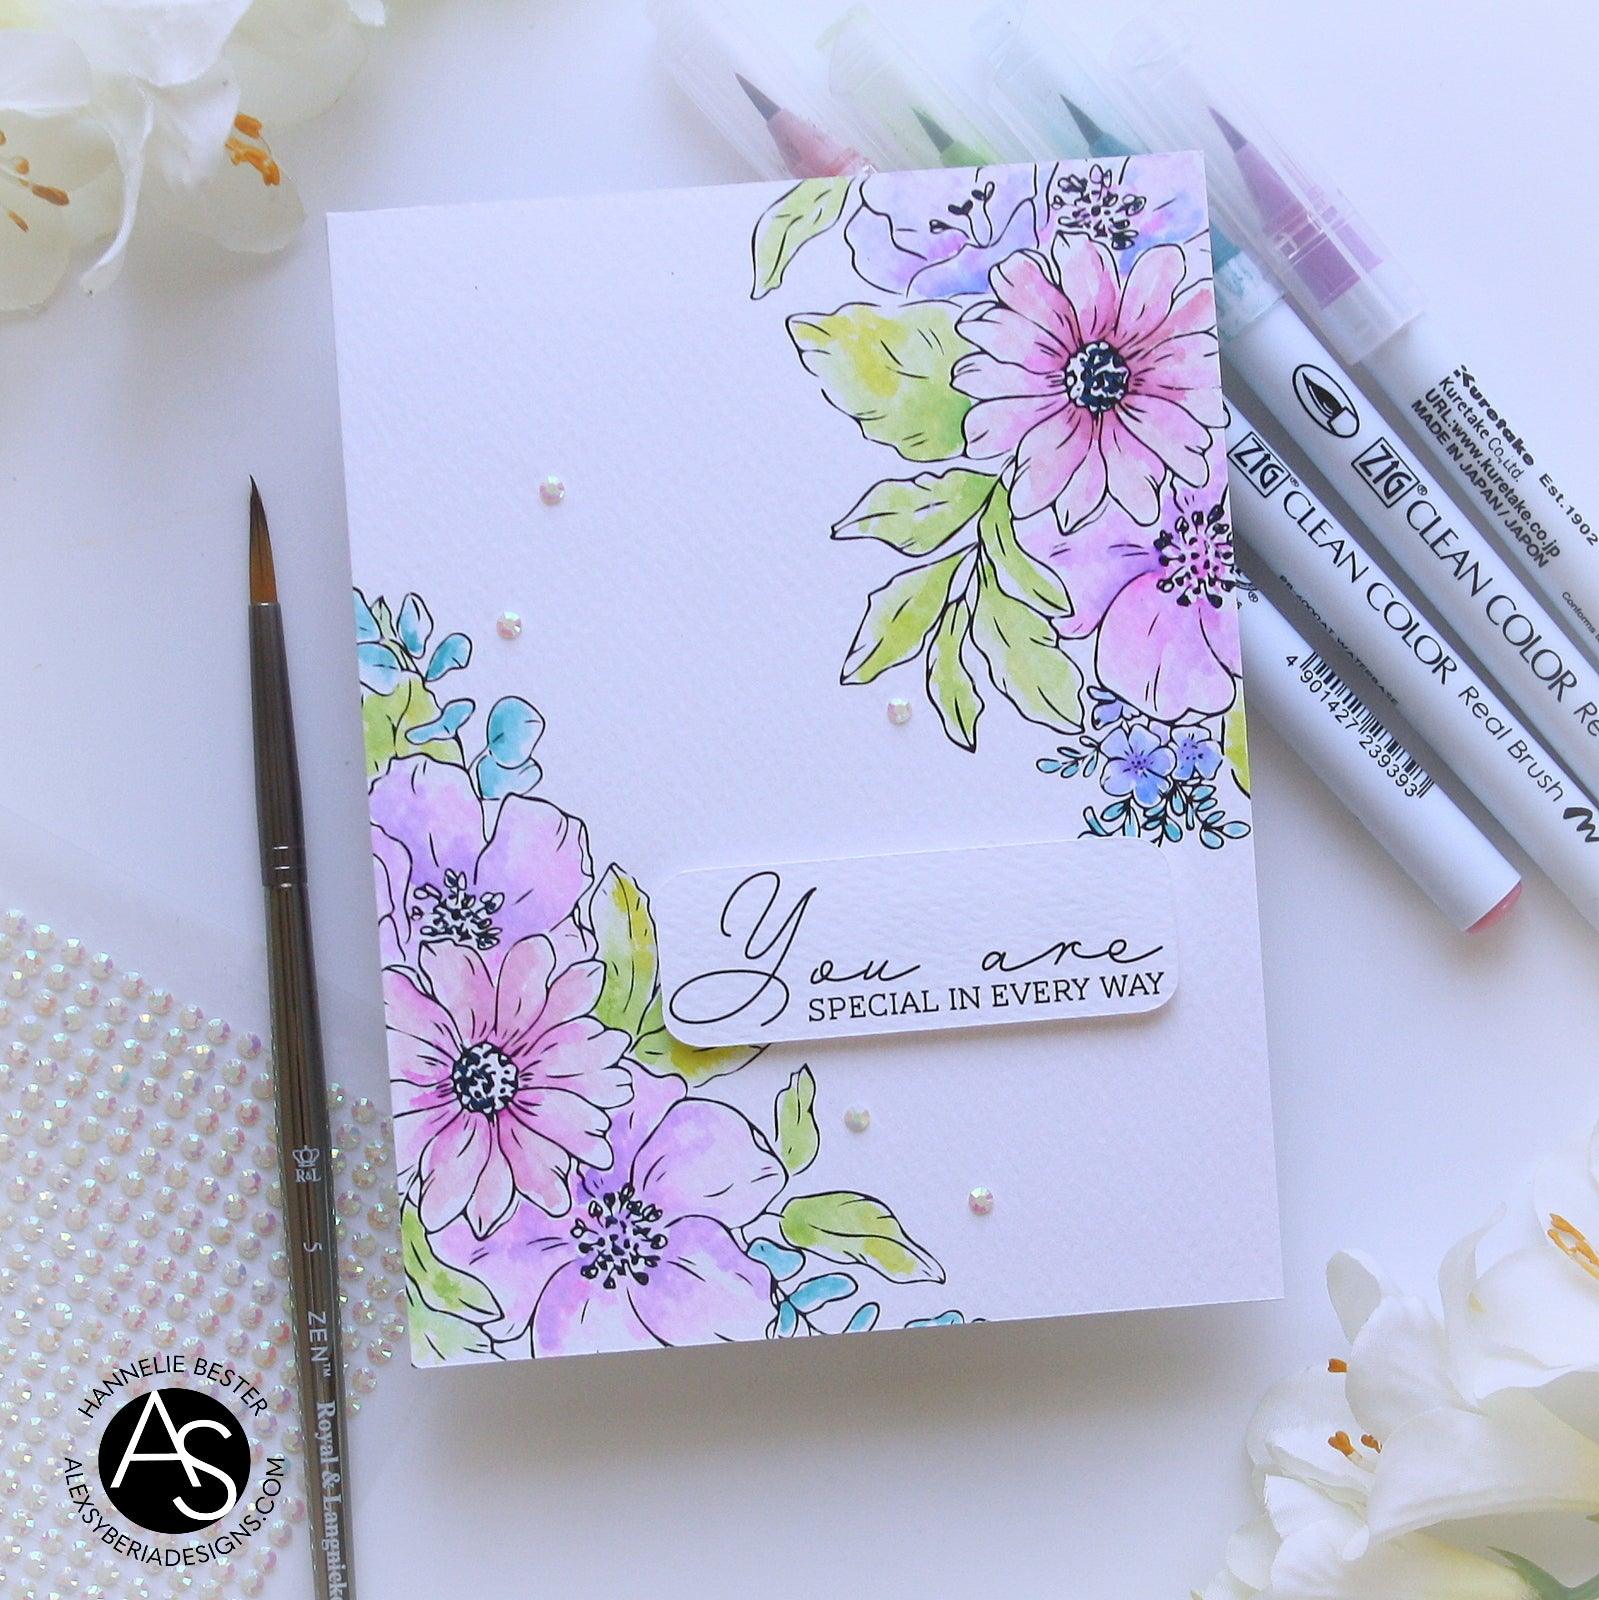 life-is-good-stamp-set-alex-syberia-designs-bouquet-coloring-cardmaking-tutorial-floral-card-famous-cardmaking-brands-copic-coloring-handmadecards-stencils-embossing-watercoloring-zig-markers